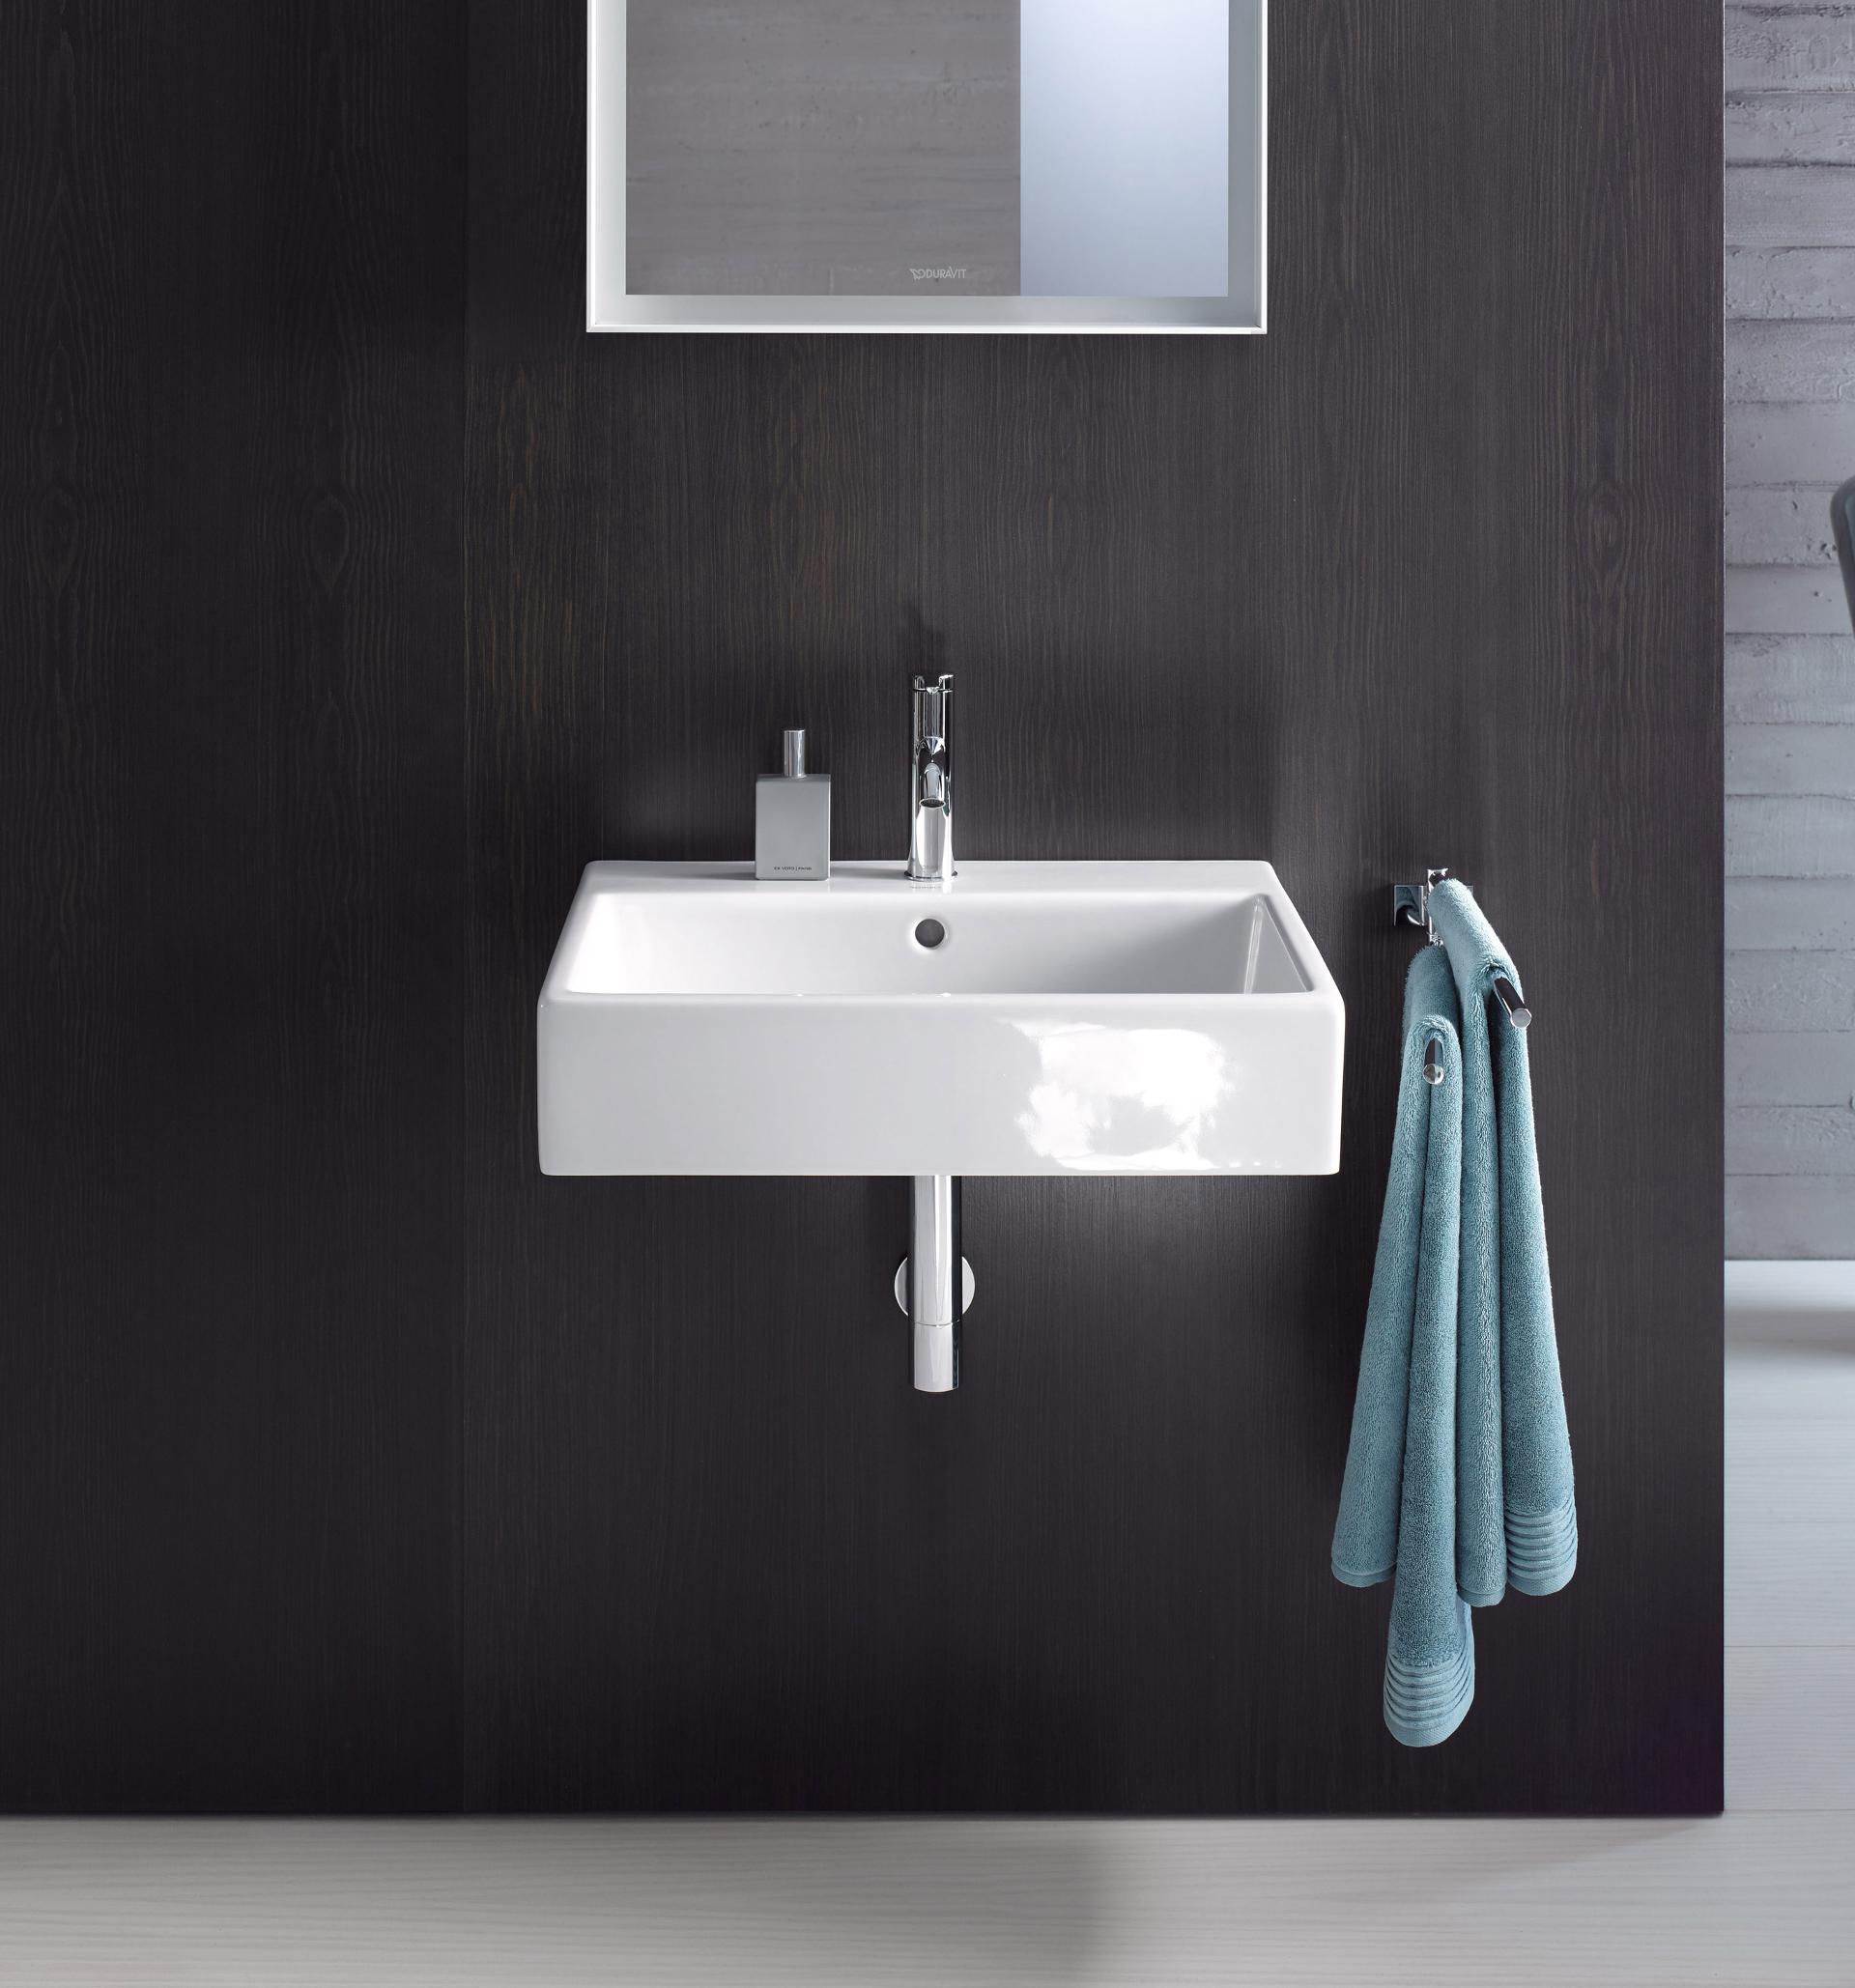 Vero Air washbasin Compact in front of dark wall
